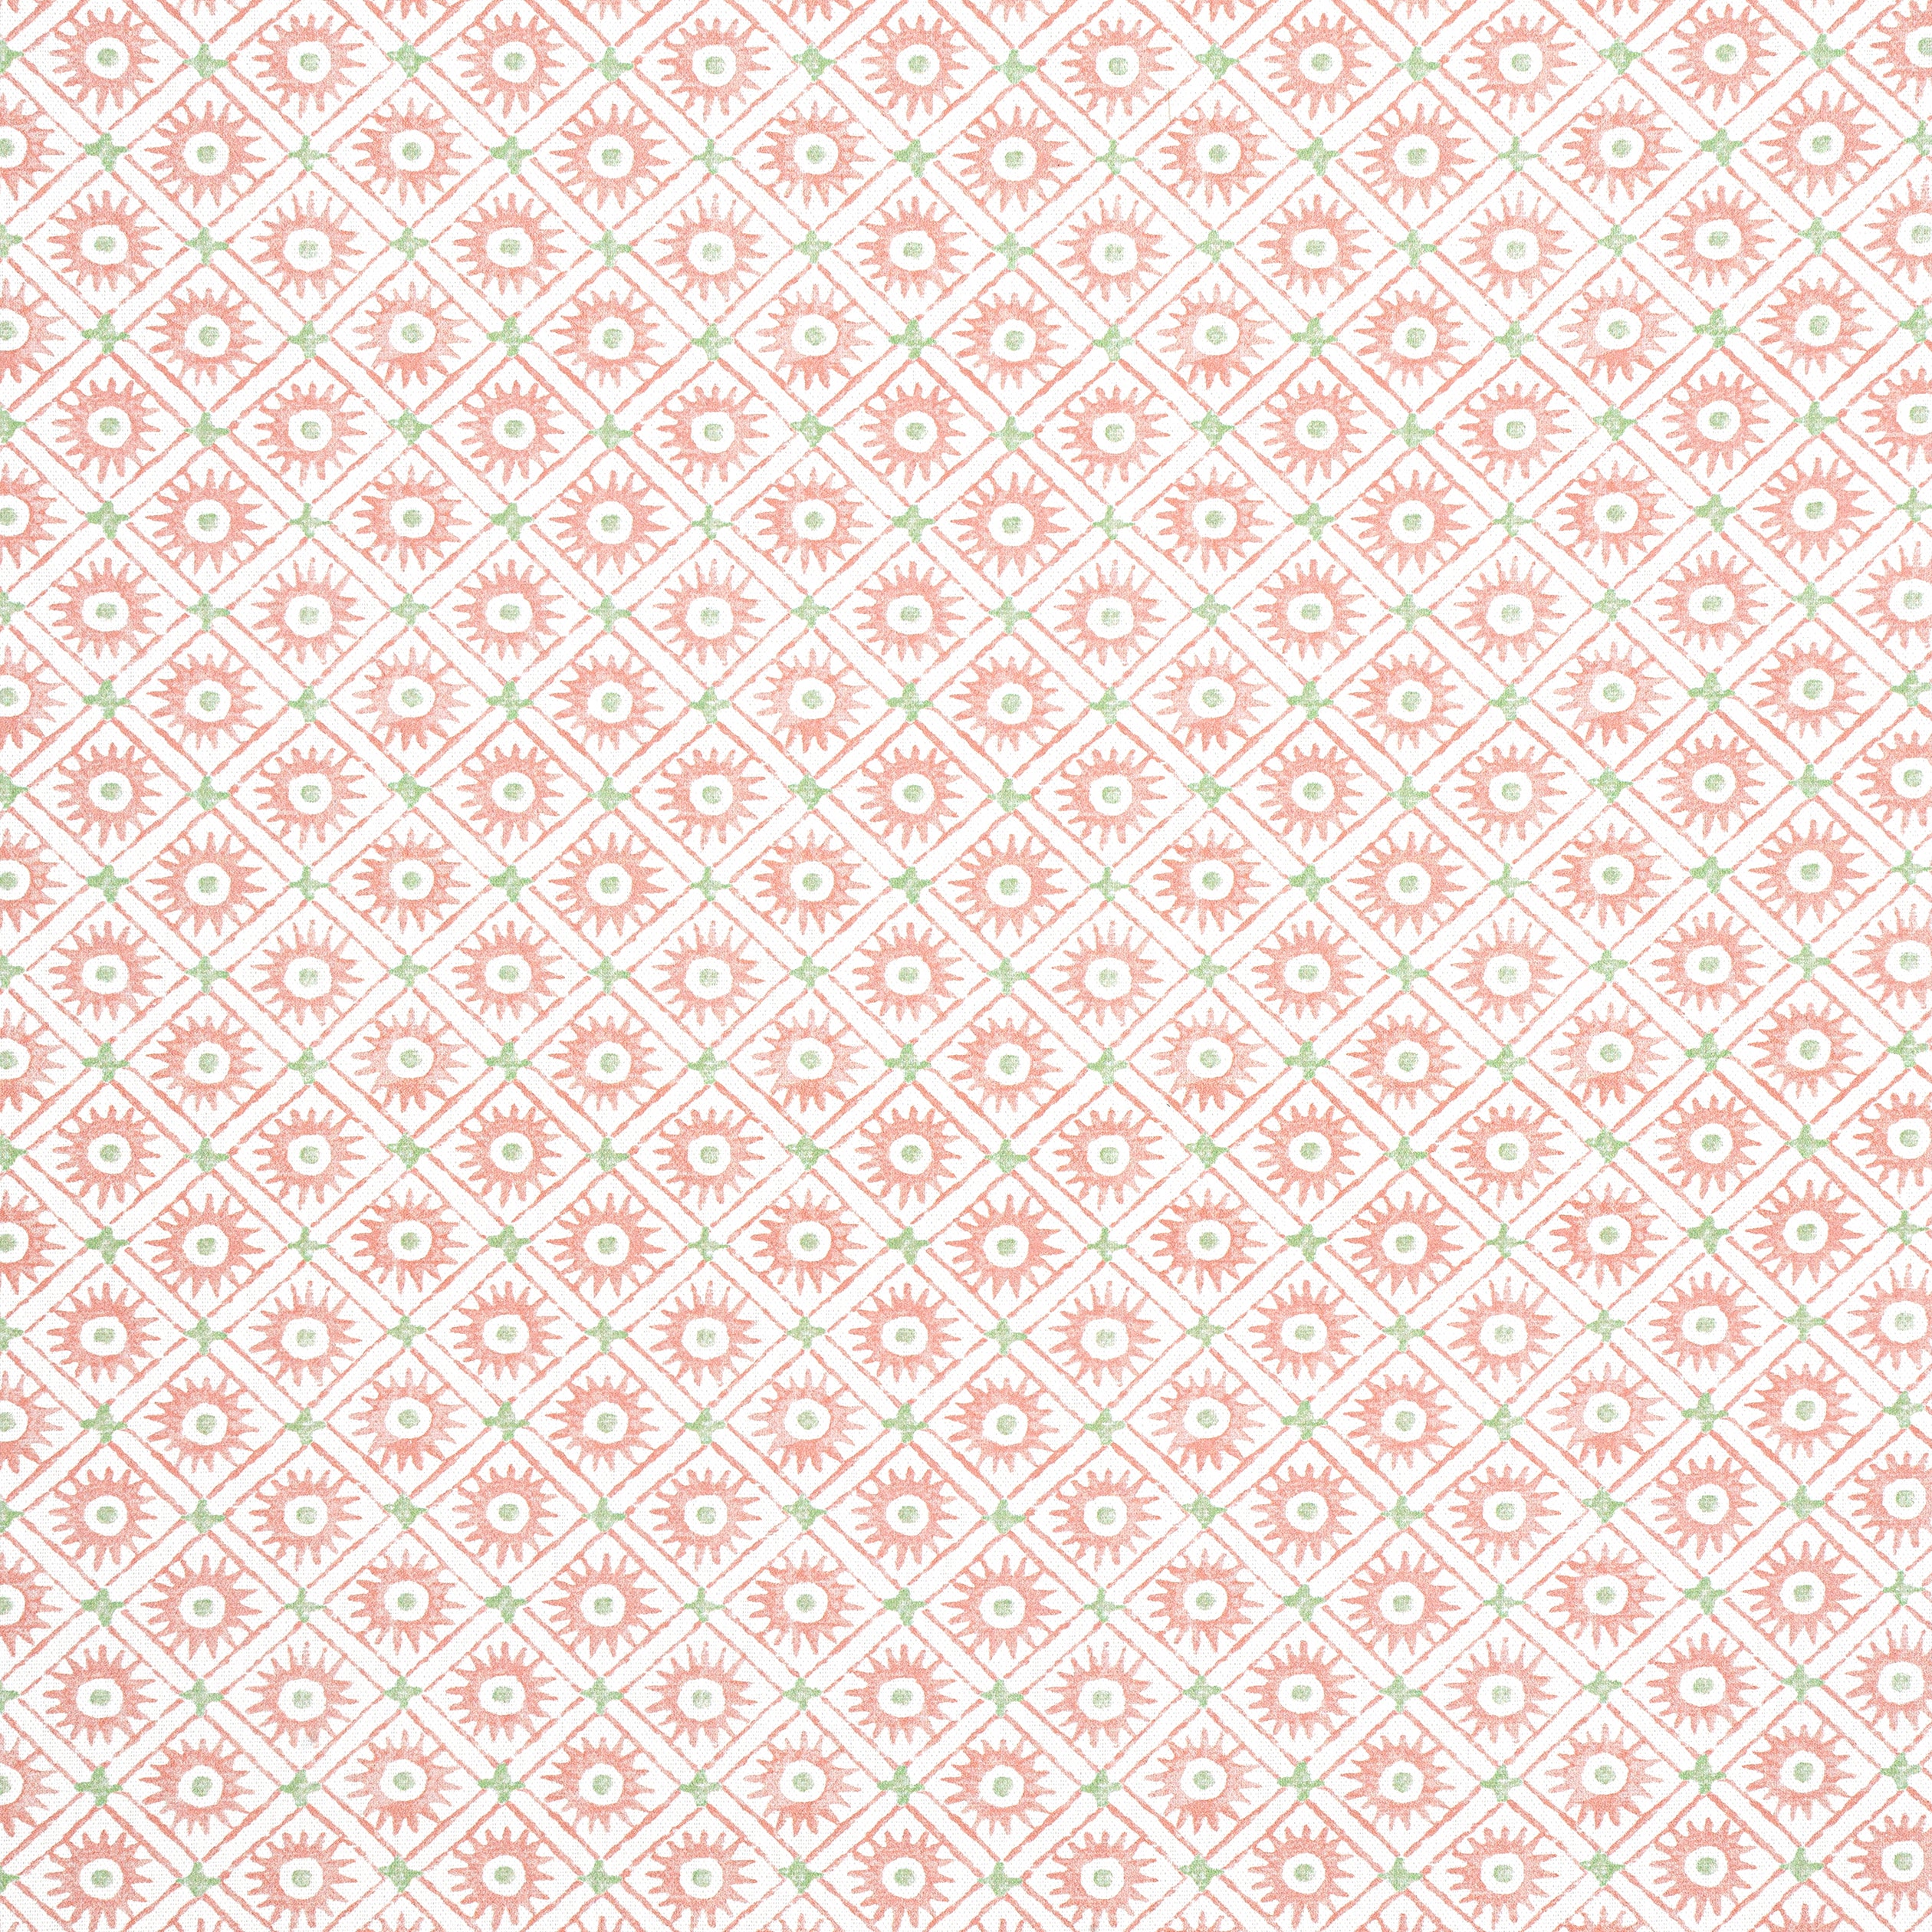 Mini Sun fabric in Rose color - pattern number AF24570 - by Anna French in the Devon collection